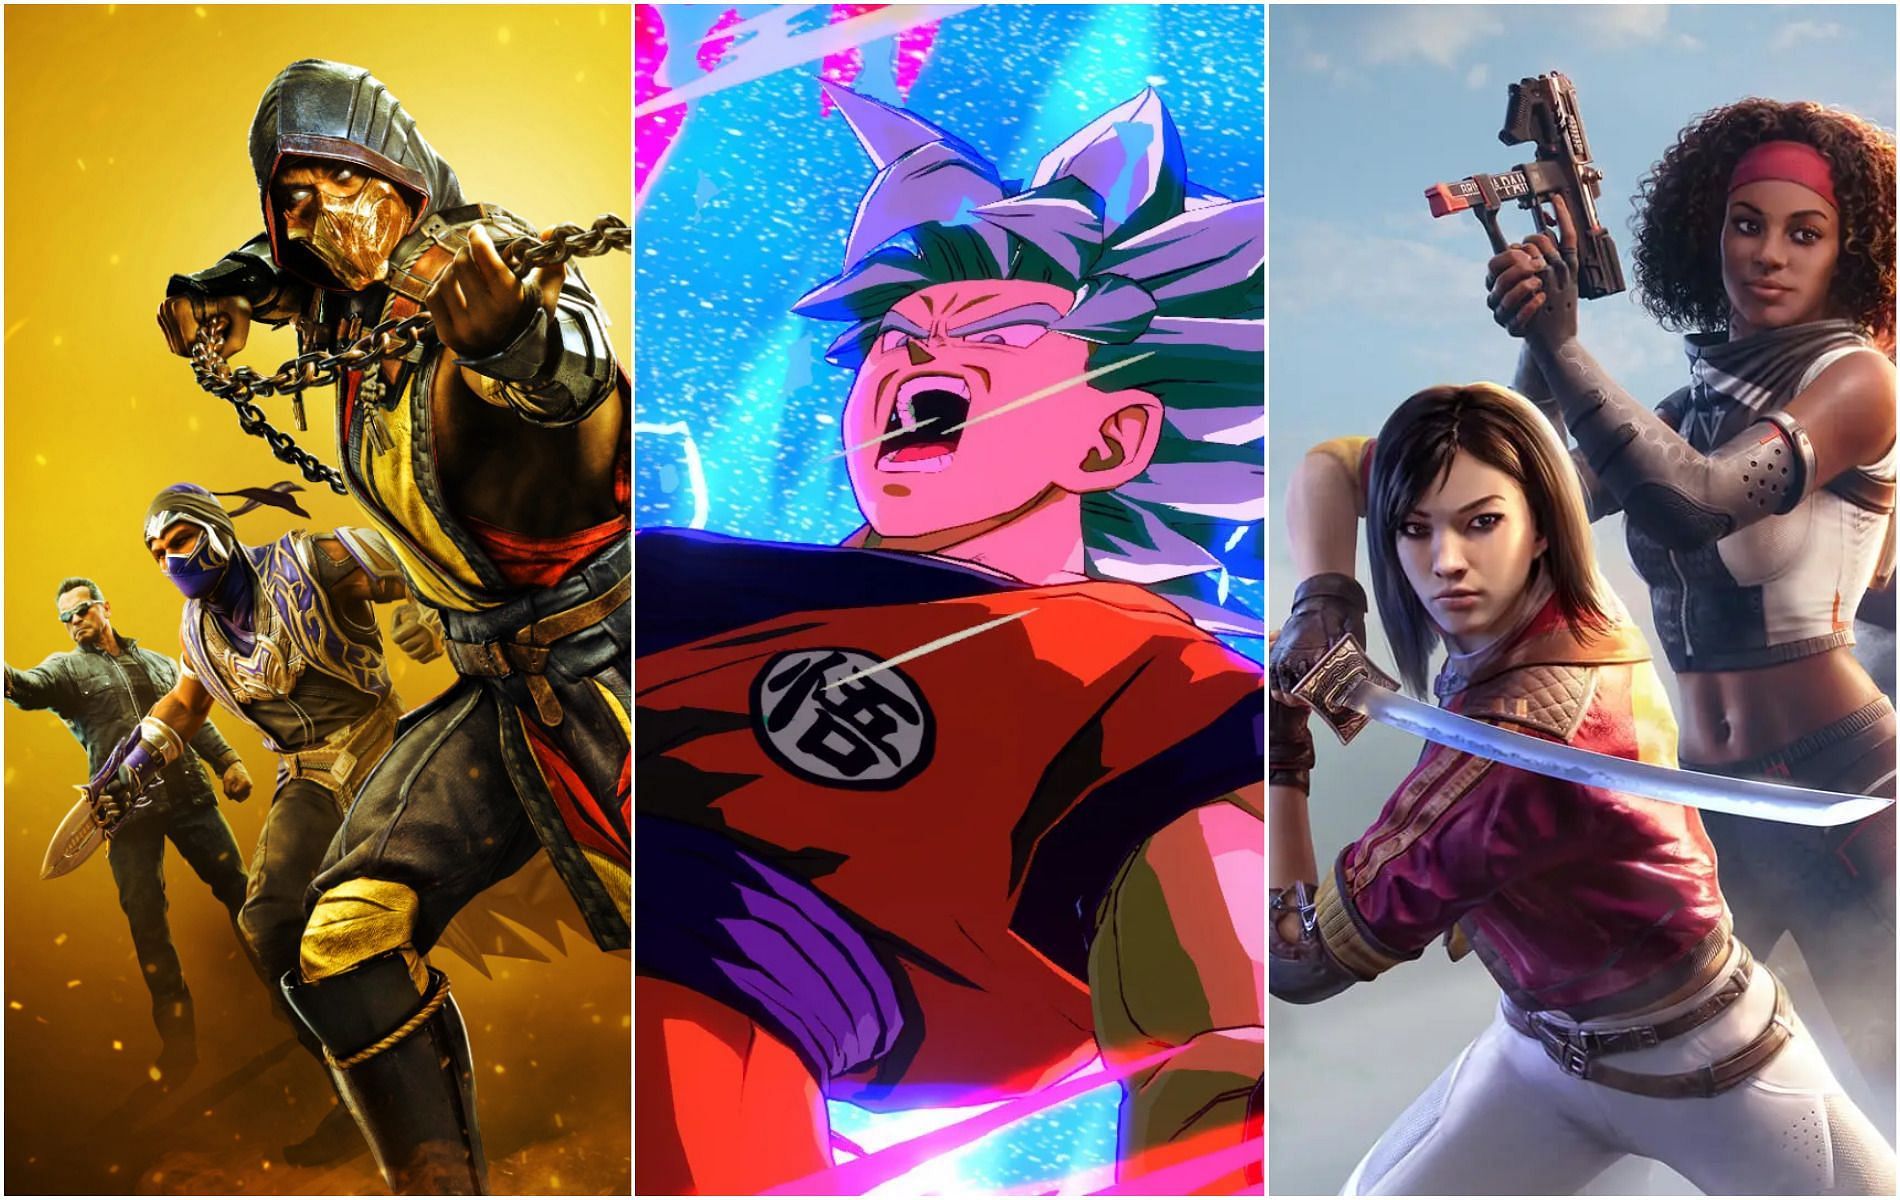 Unlike most ports on Switch, these games aim high with performance (Images via NetherRealm Studios/Arc System Works/Hi-Rez Studios)